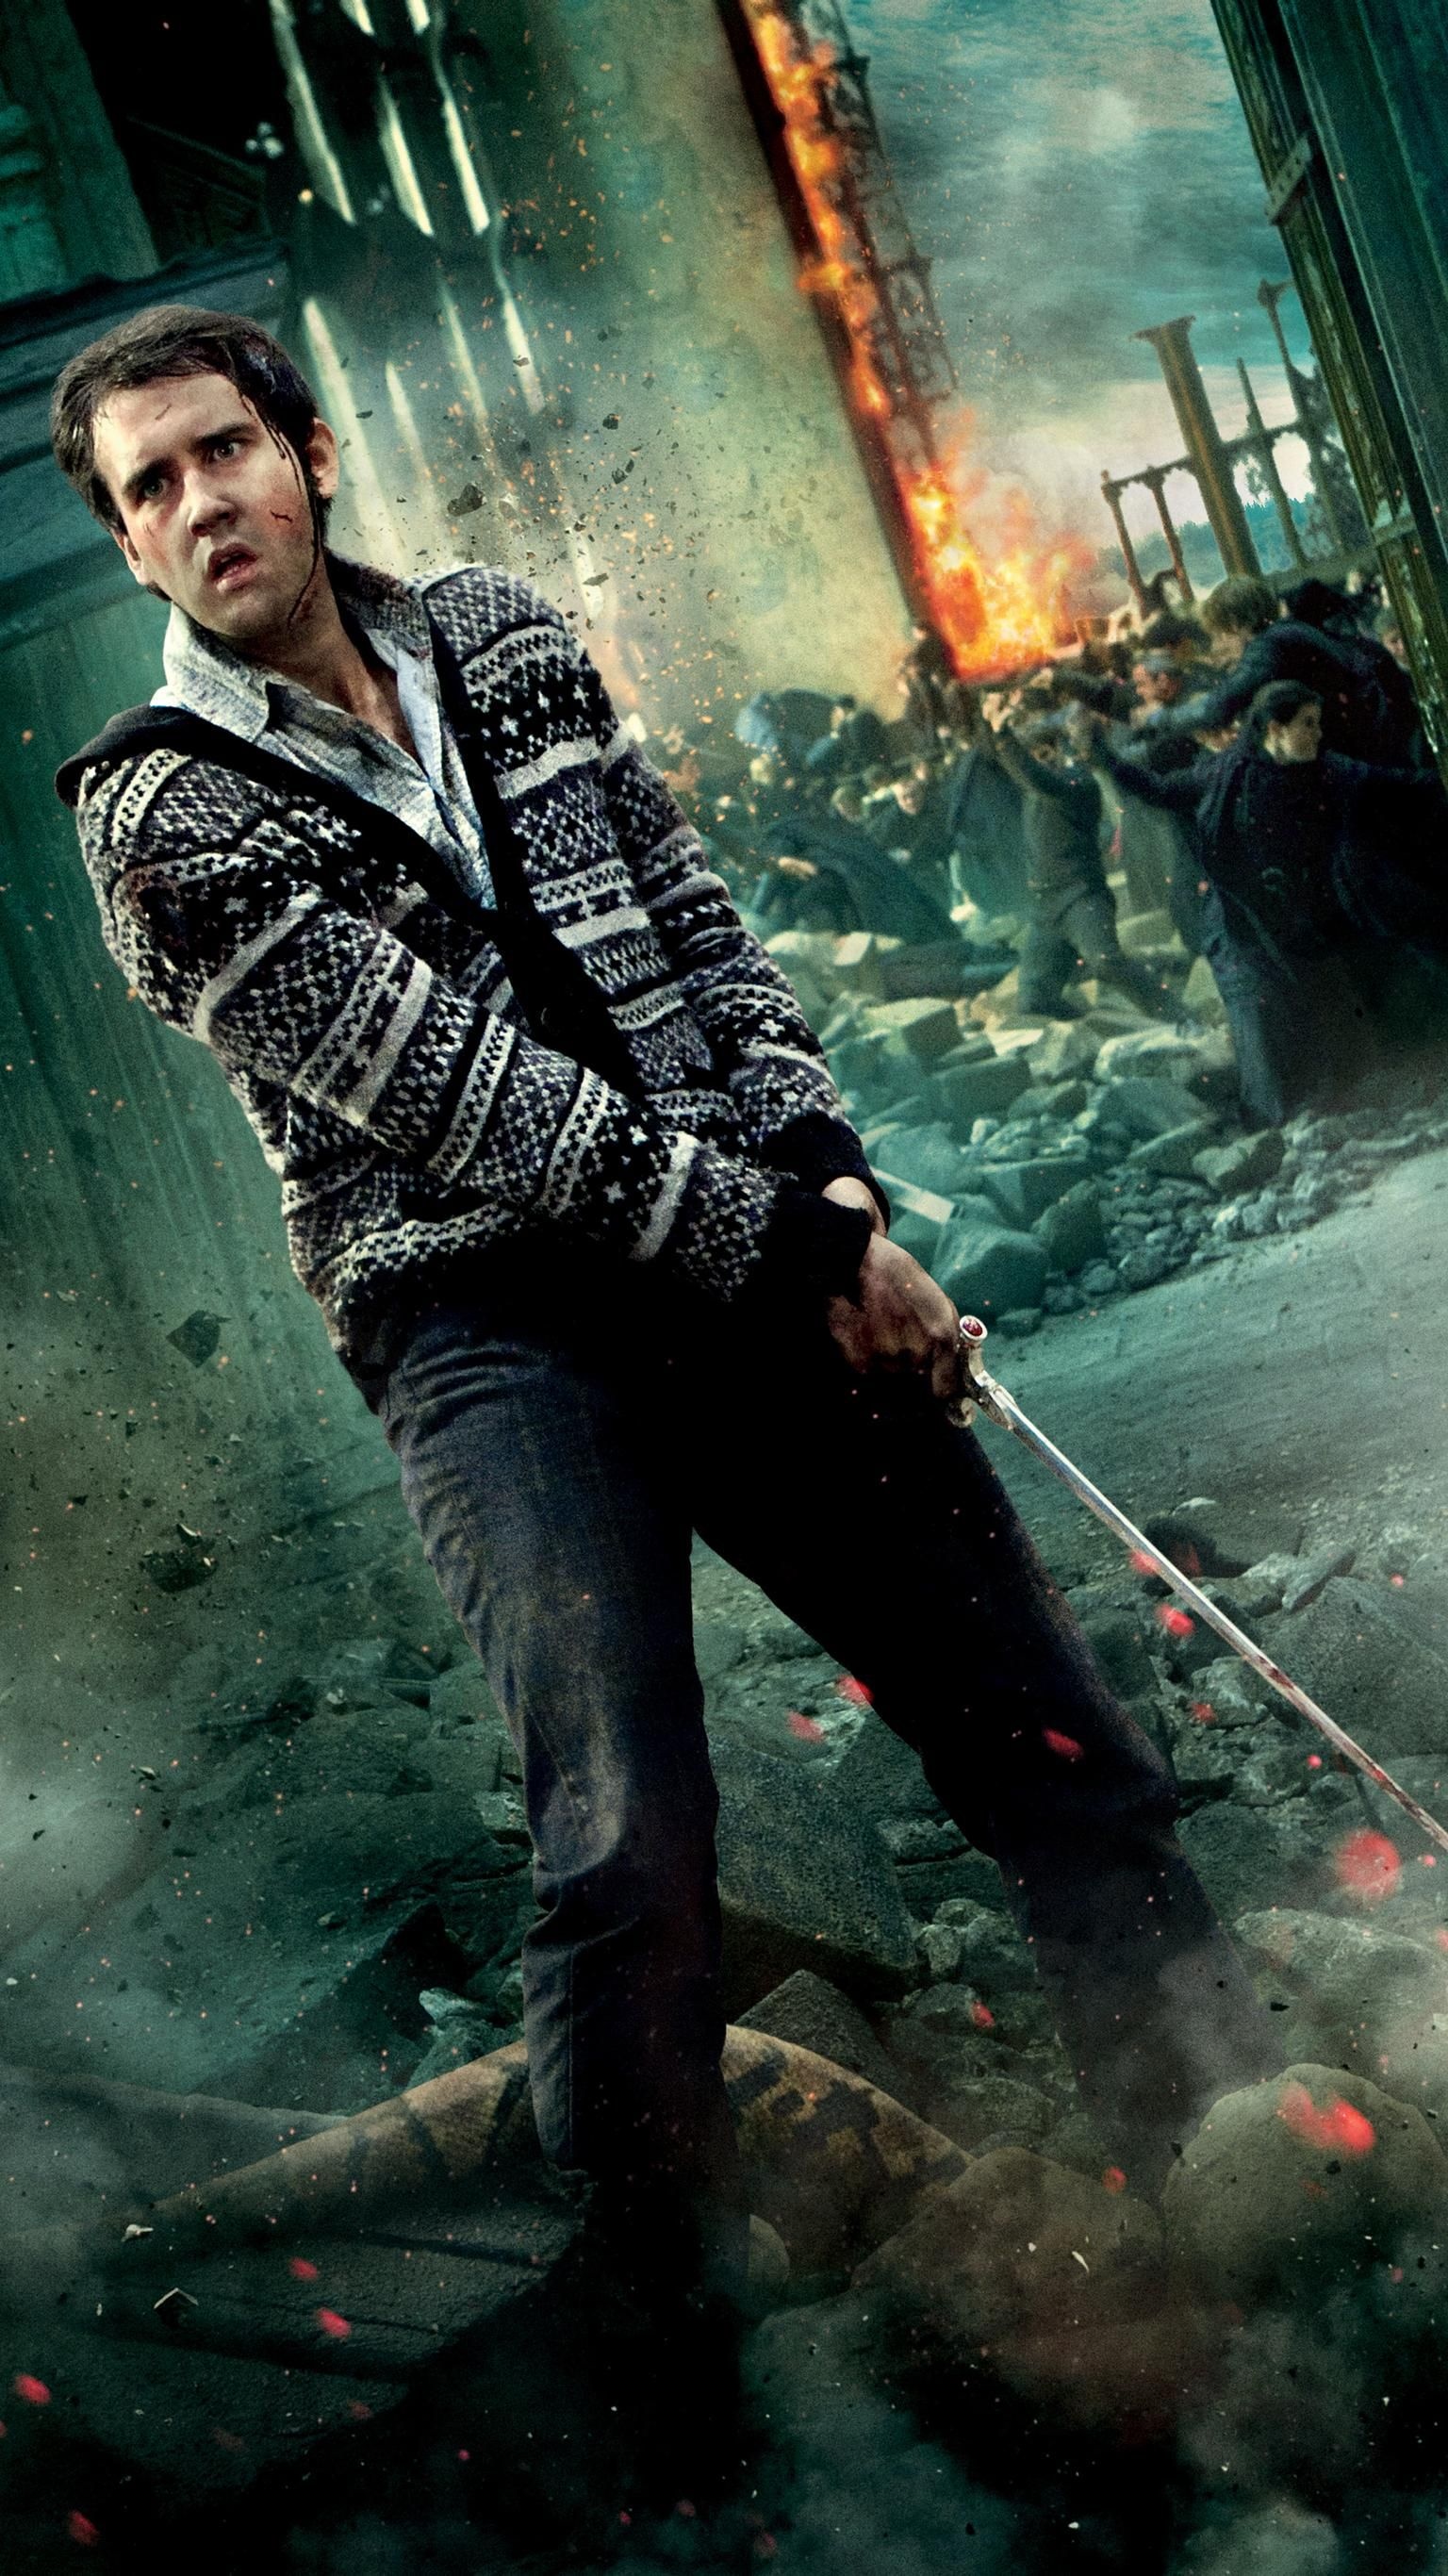 Harry Potter and the Deathly Hallows Part 2, Phone wallpaper, Movie posters, Neville Longbottom, 1540x2740 HD Handy